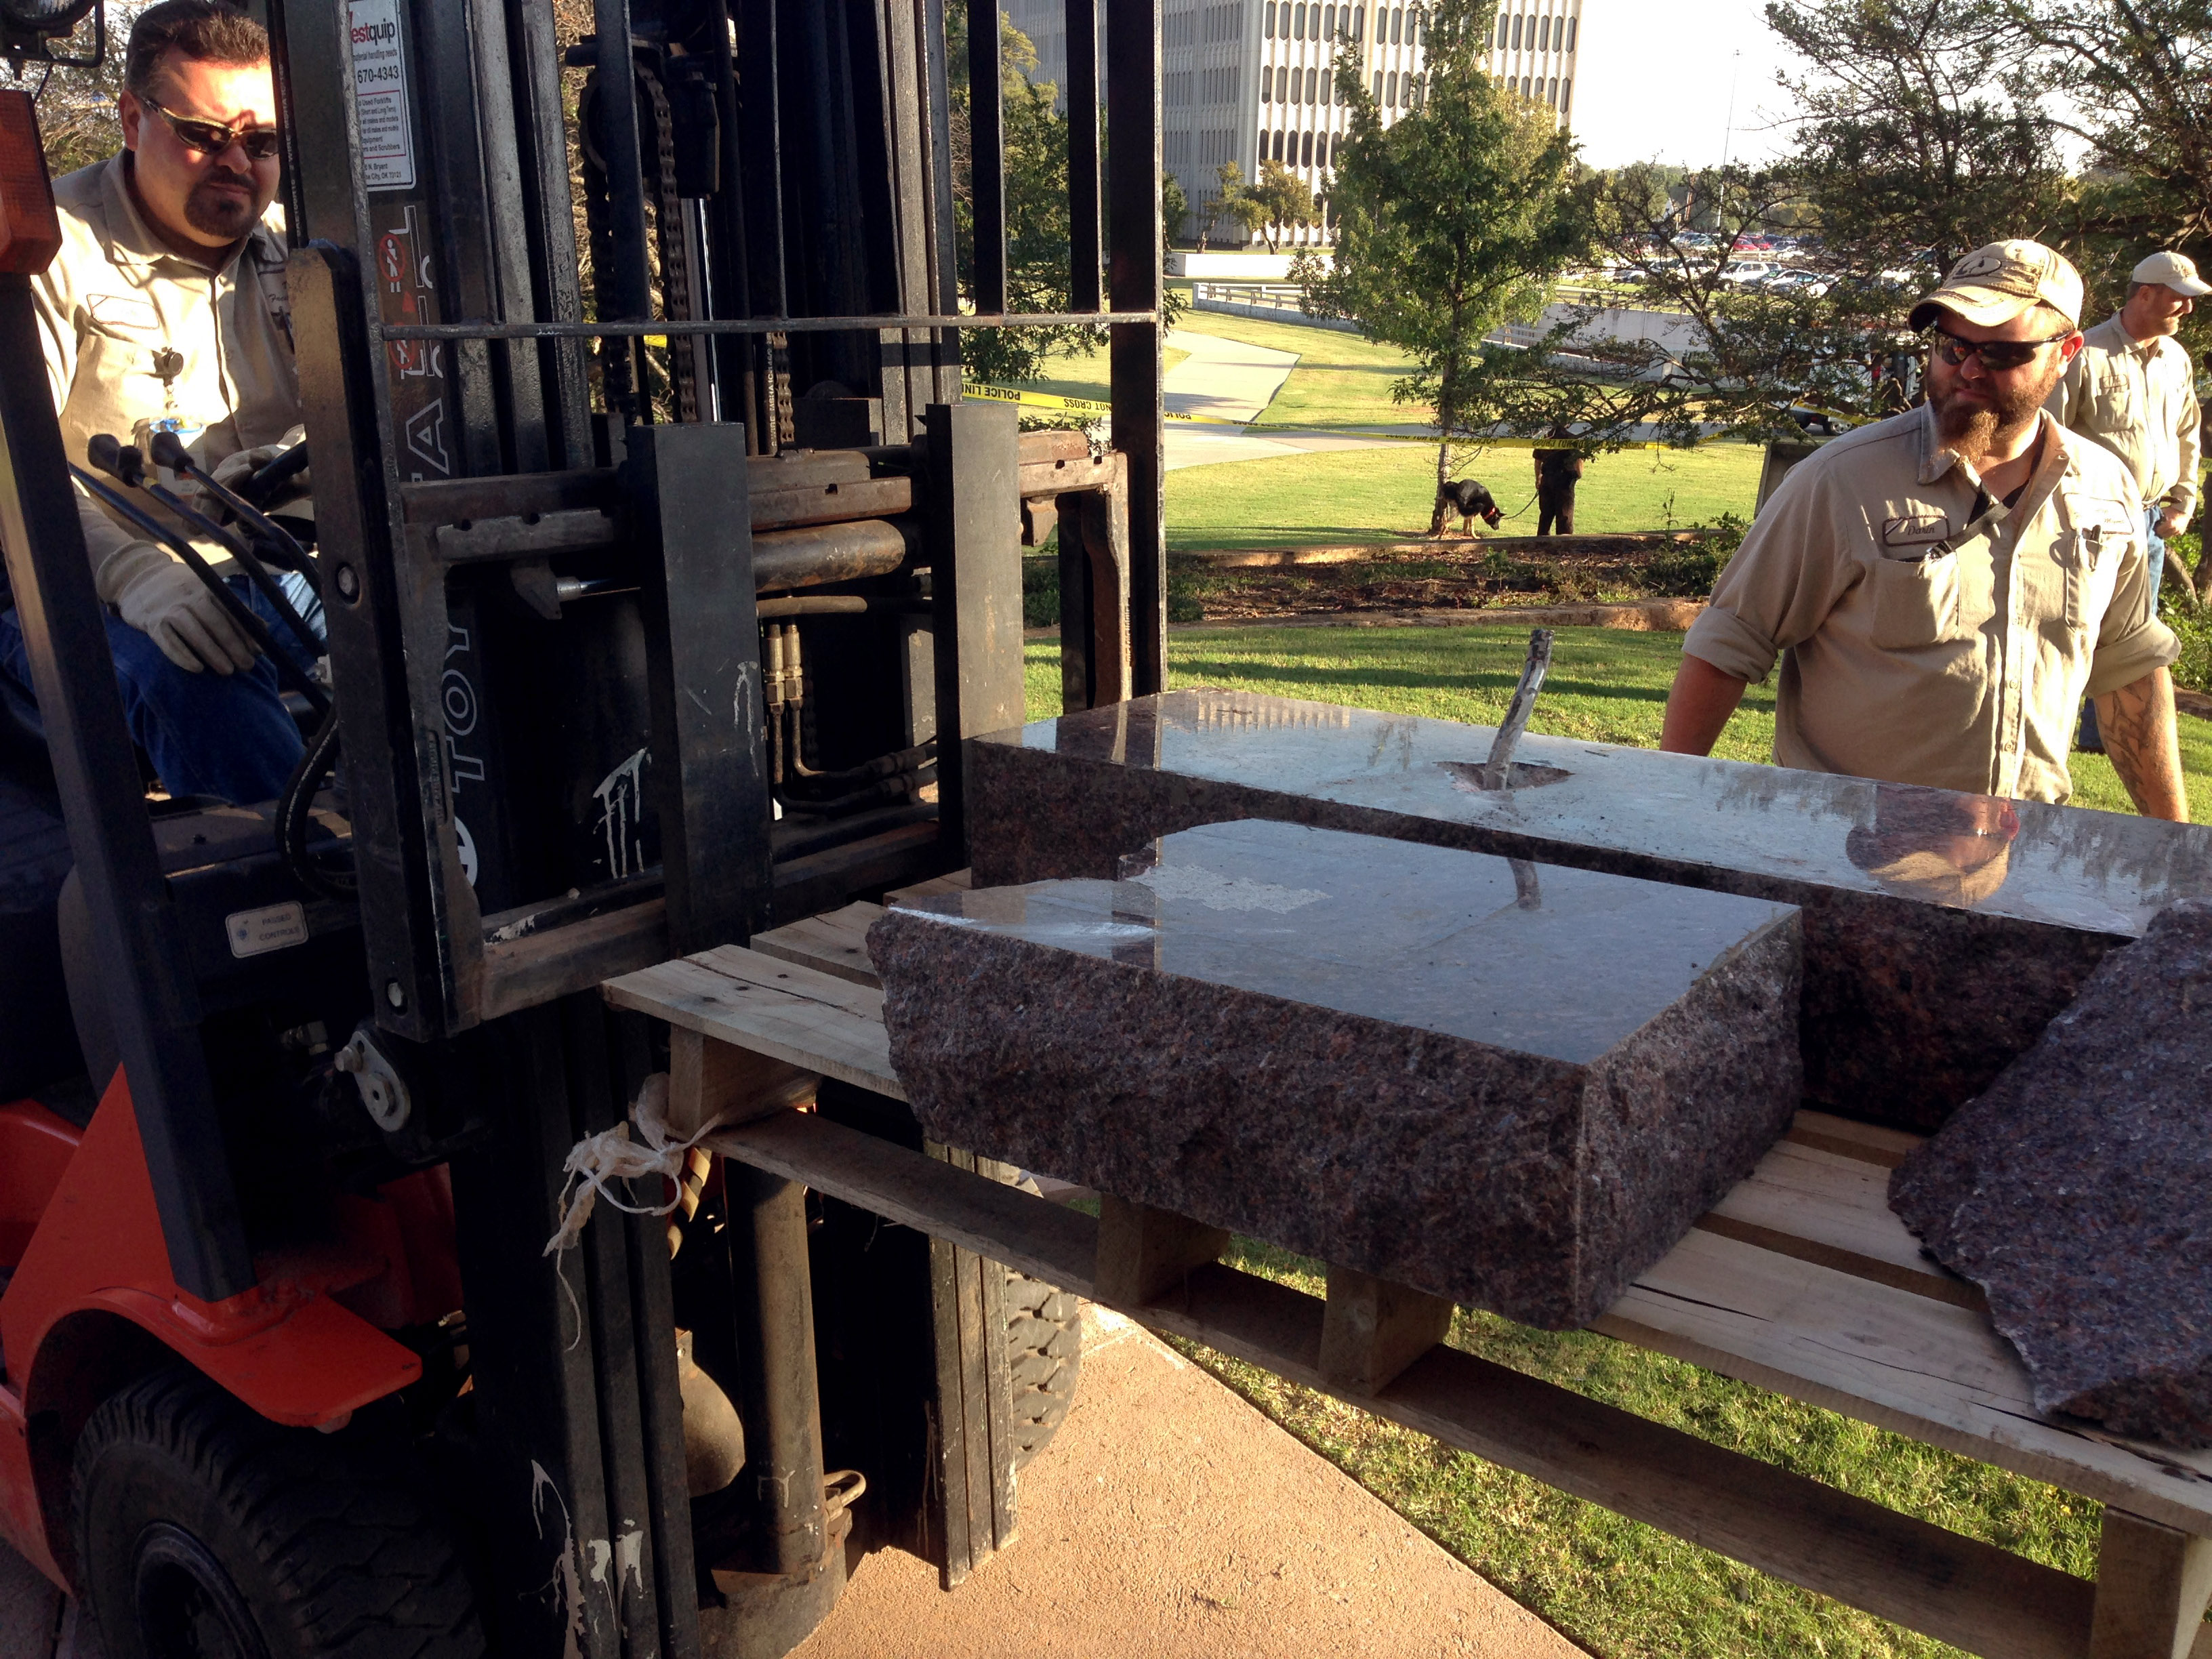 State workers for the Office of Management and Enterprise Services remove the damaged remains of a Ten Commandments monument from the Oklahoma State Capitol grounds on Oct. 24, 2014 in Oklahoma City. (Sean Murphy—AP)